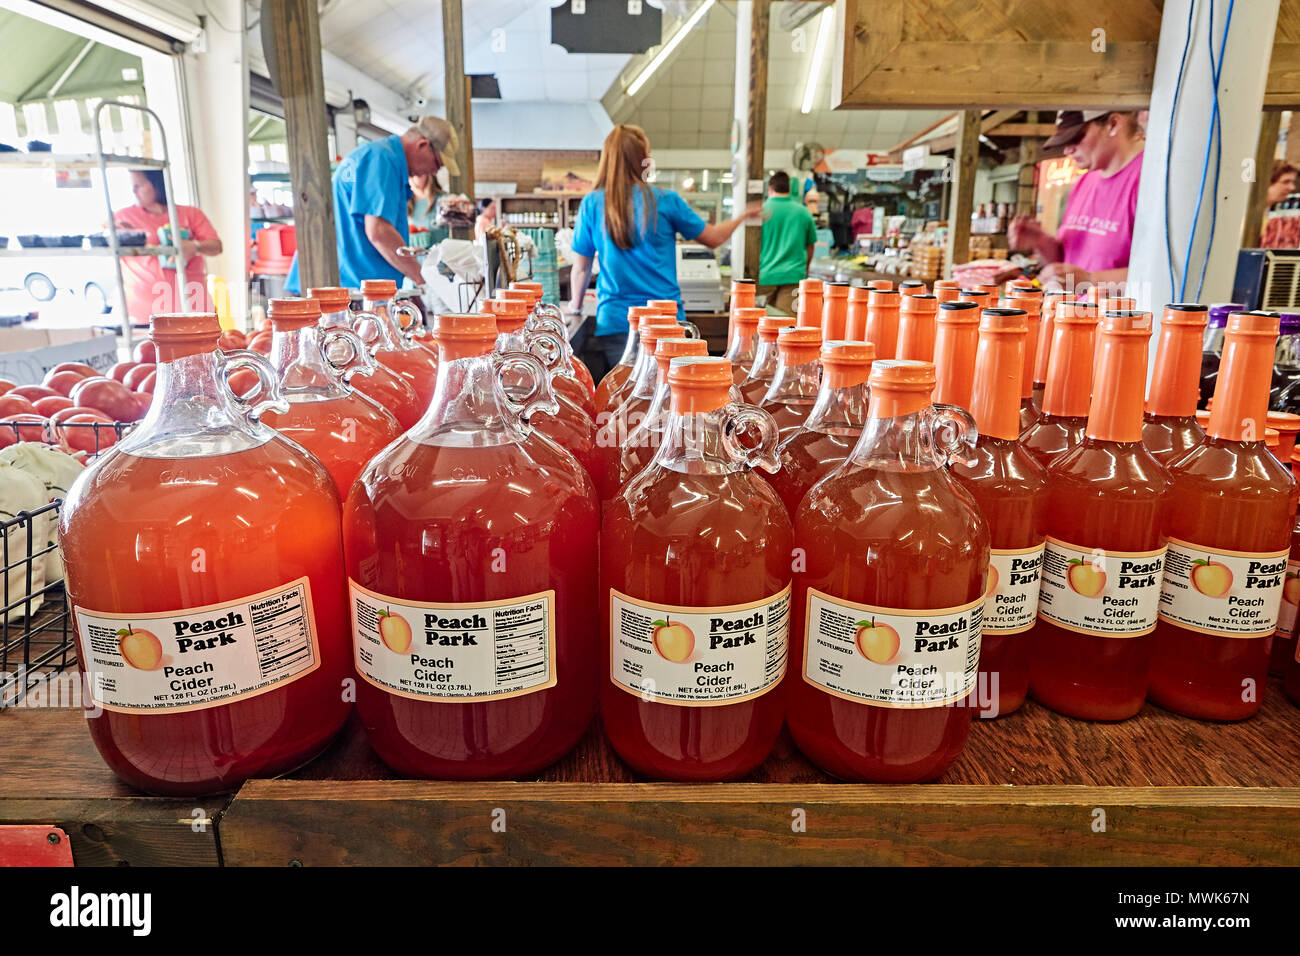 Rows of bottles of peach cider for sale at a roadside market in Clanton Alabama, USA. Stock Photo